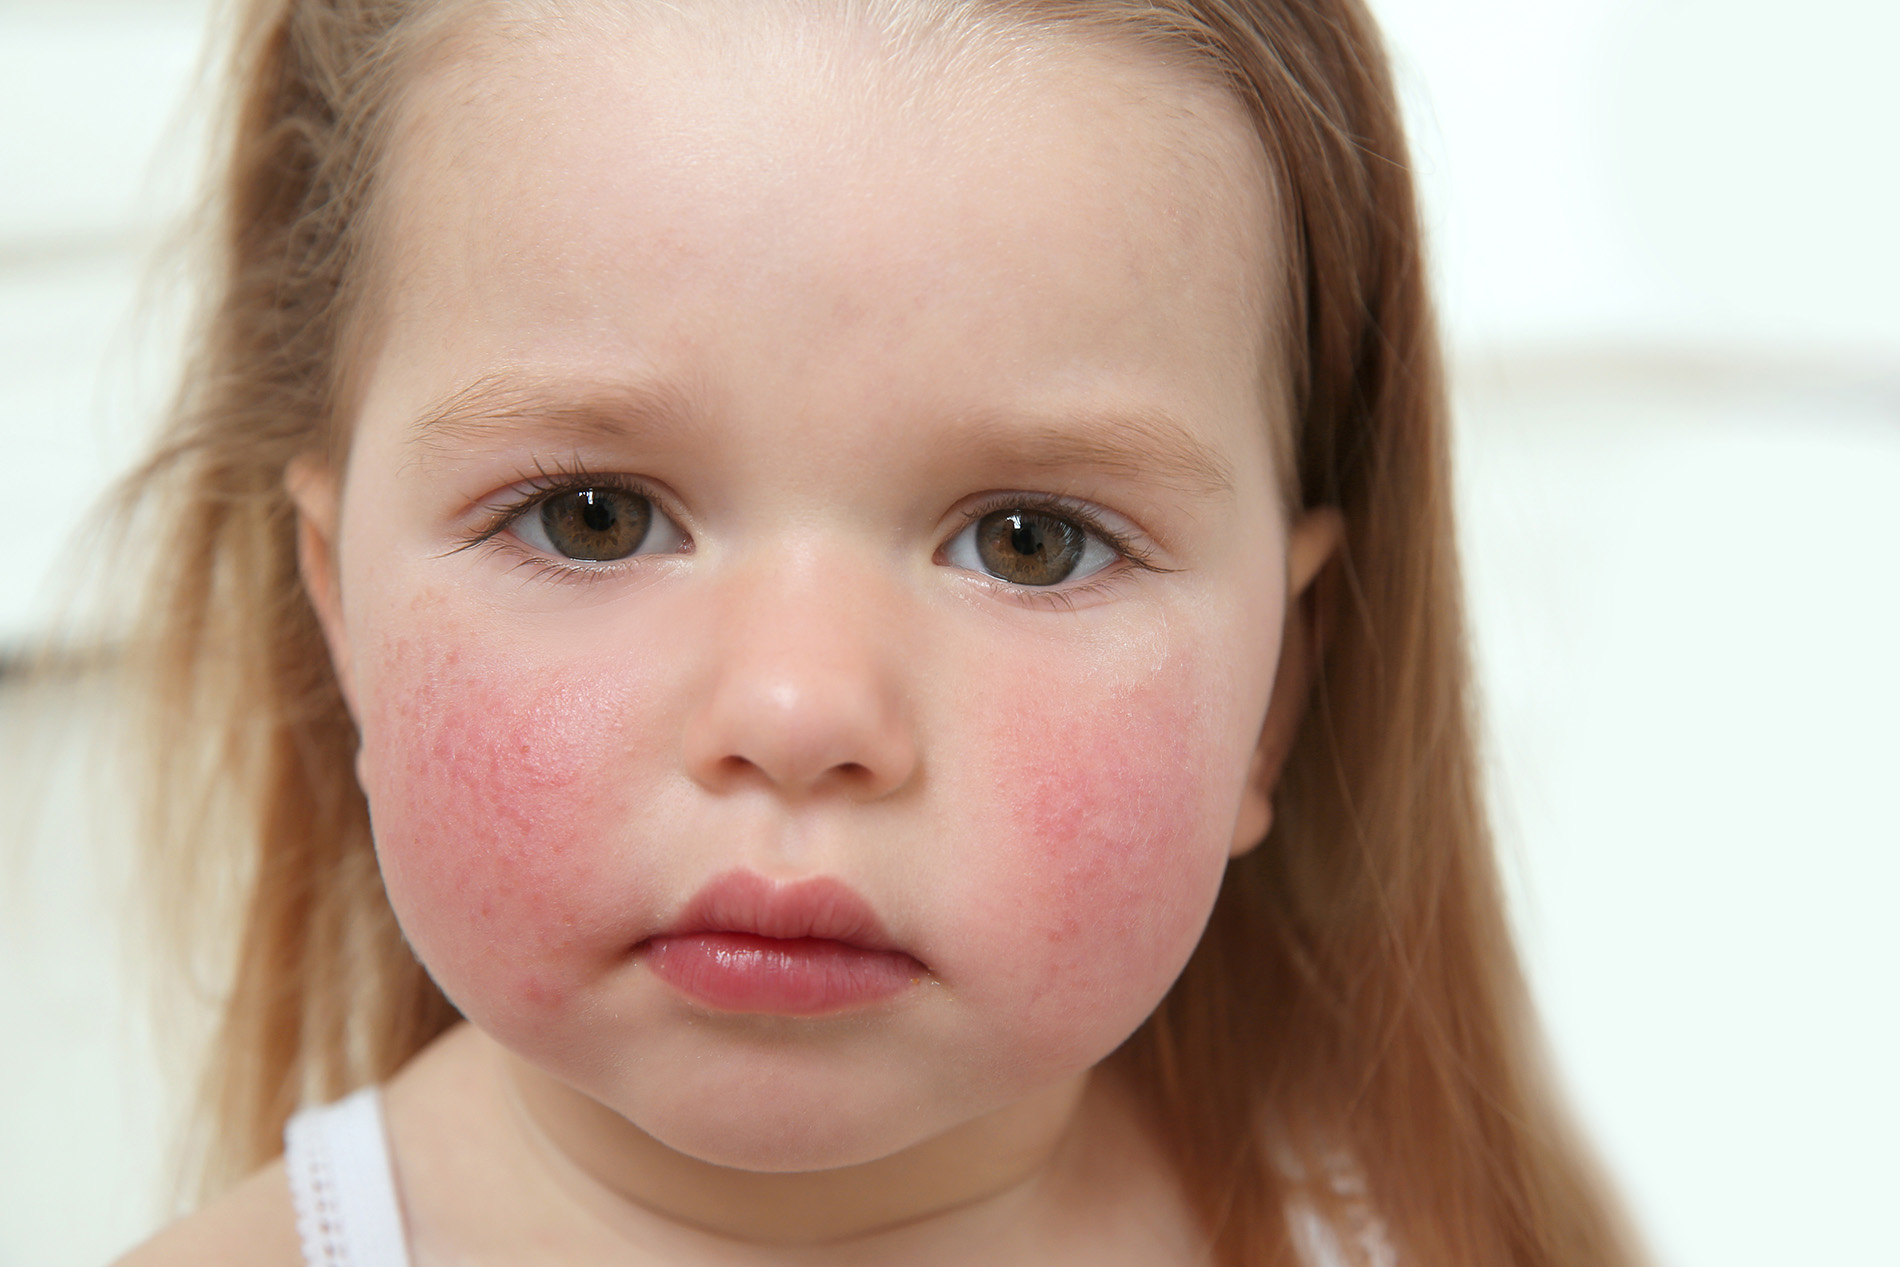 Little girl with red rash on face from Fifth's Disease